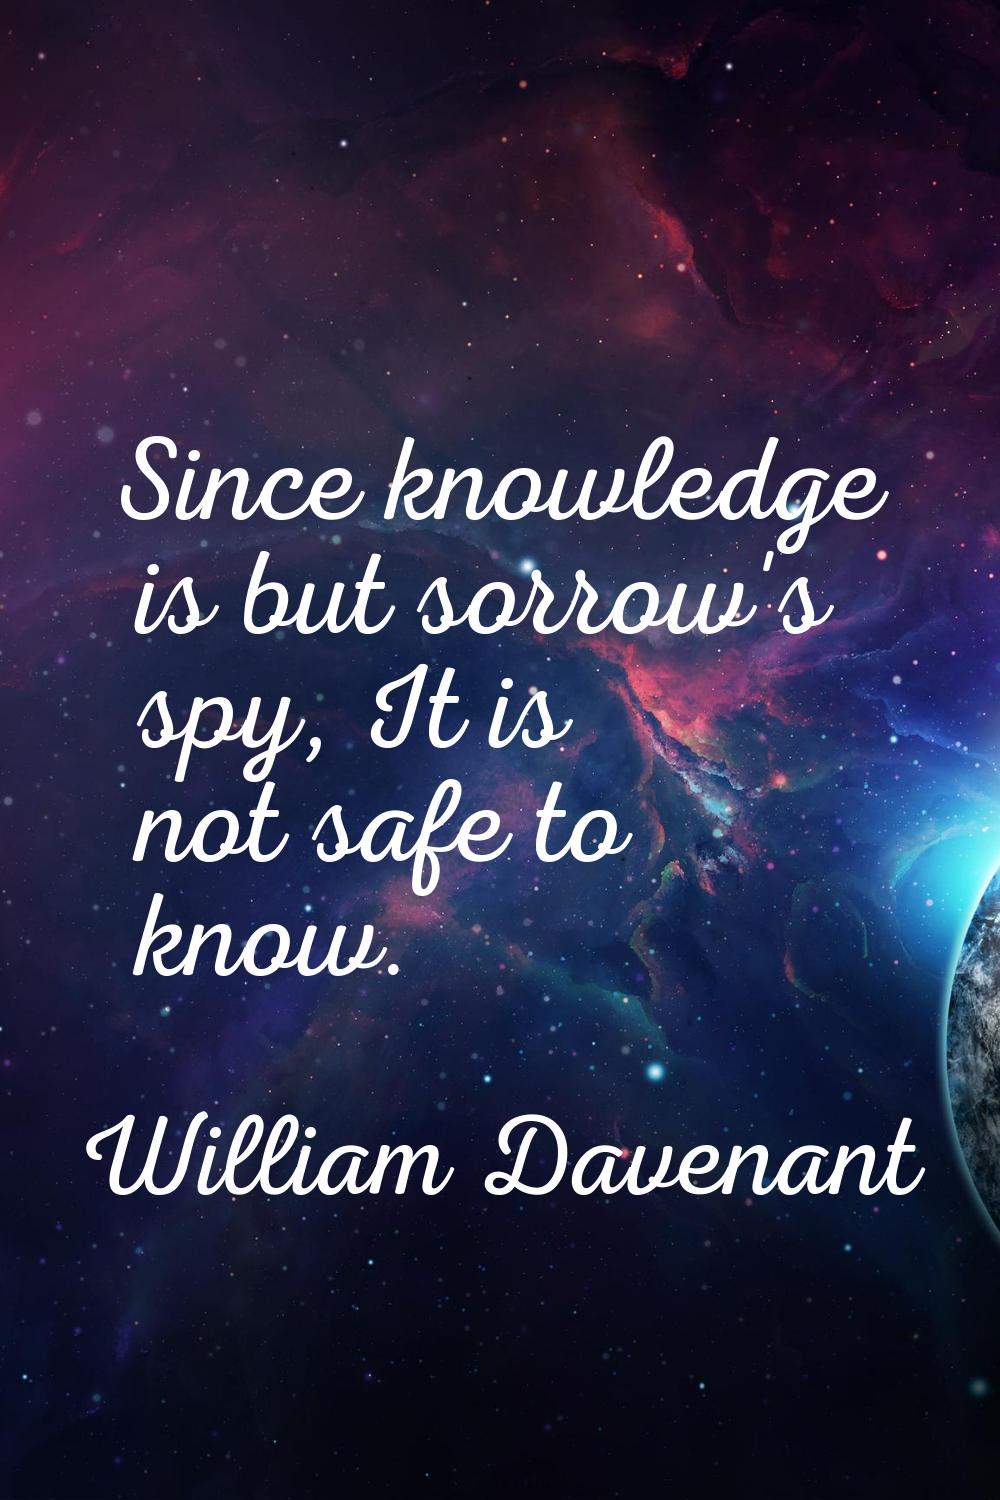 Since knowledge is but sorrow's spy, It is not safe to know.